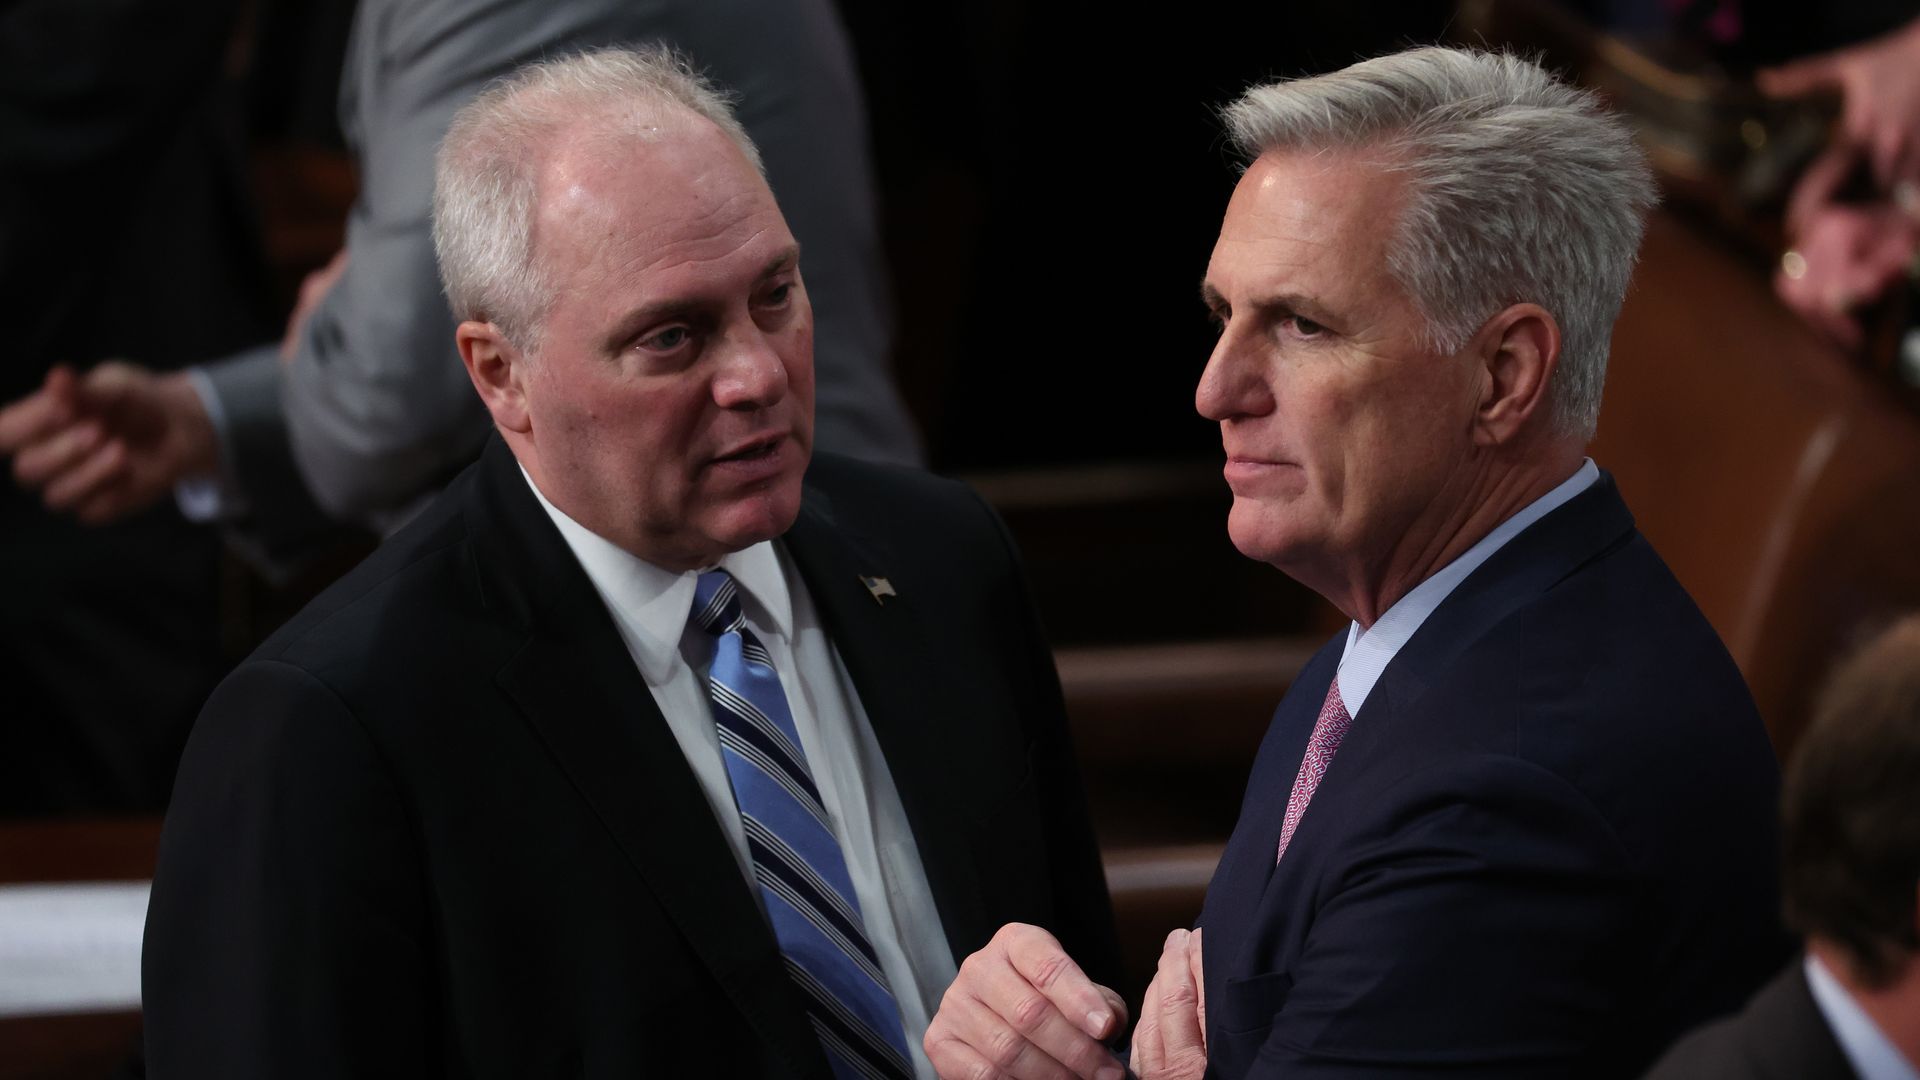 McCarthy and Scalise